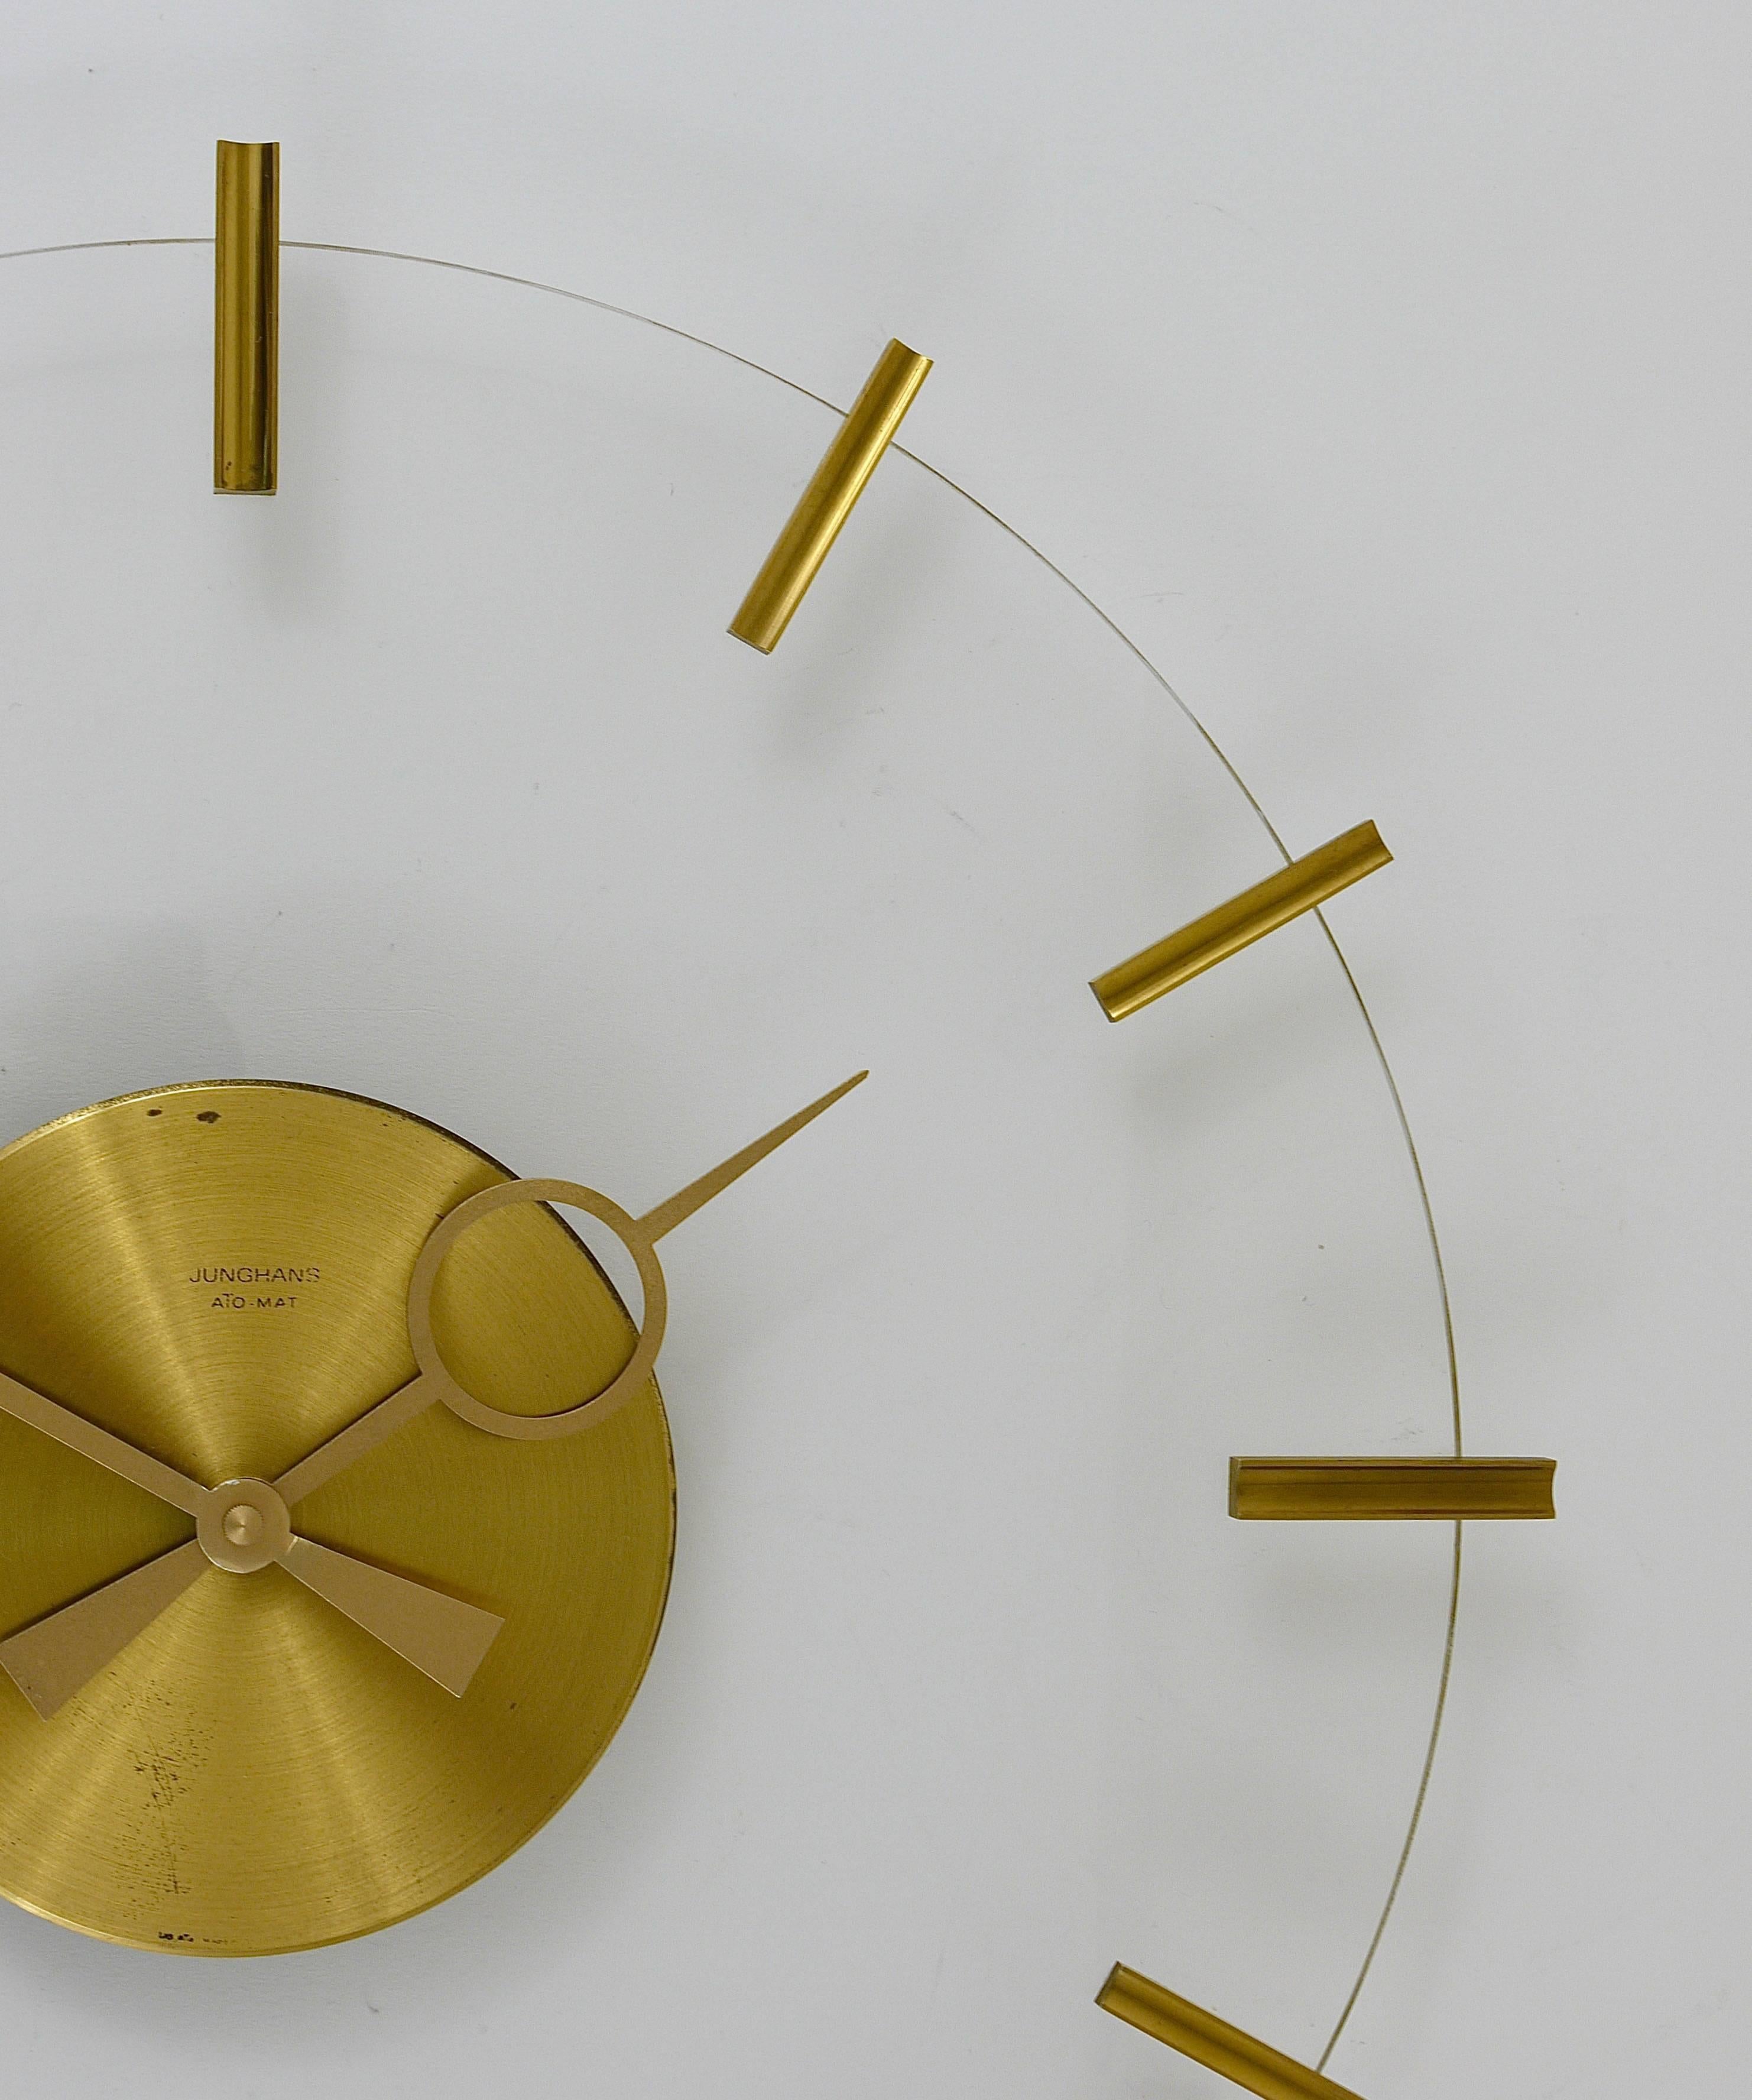 Junghans Ato-Mat Lucite Brass Midcentury Sun Wall Clock, Germany, 1950s 1